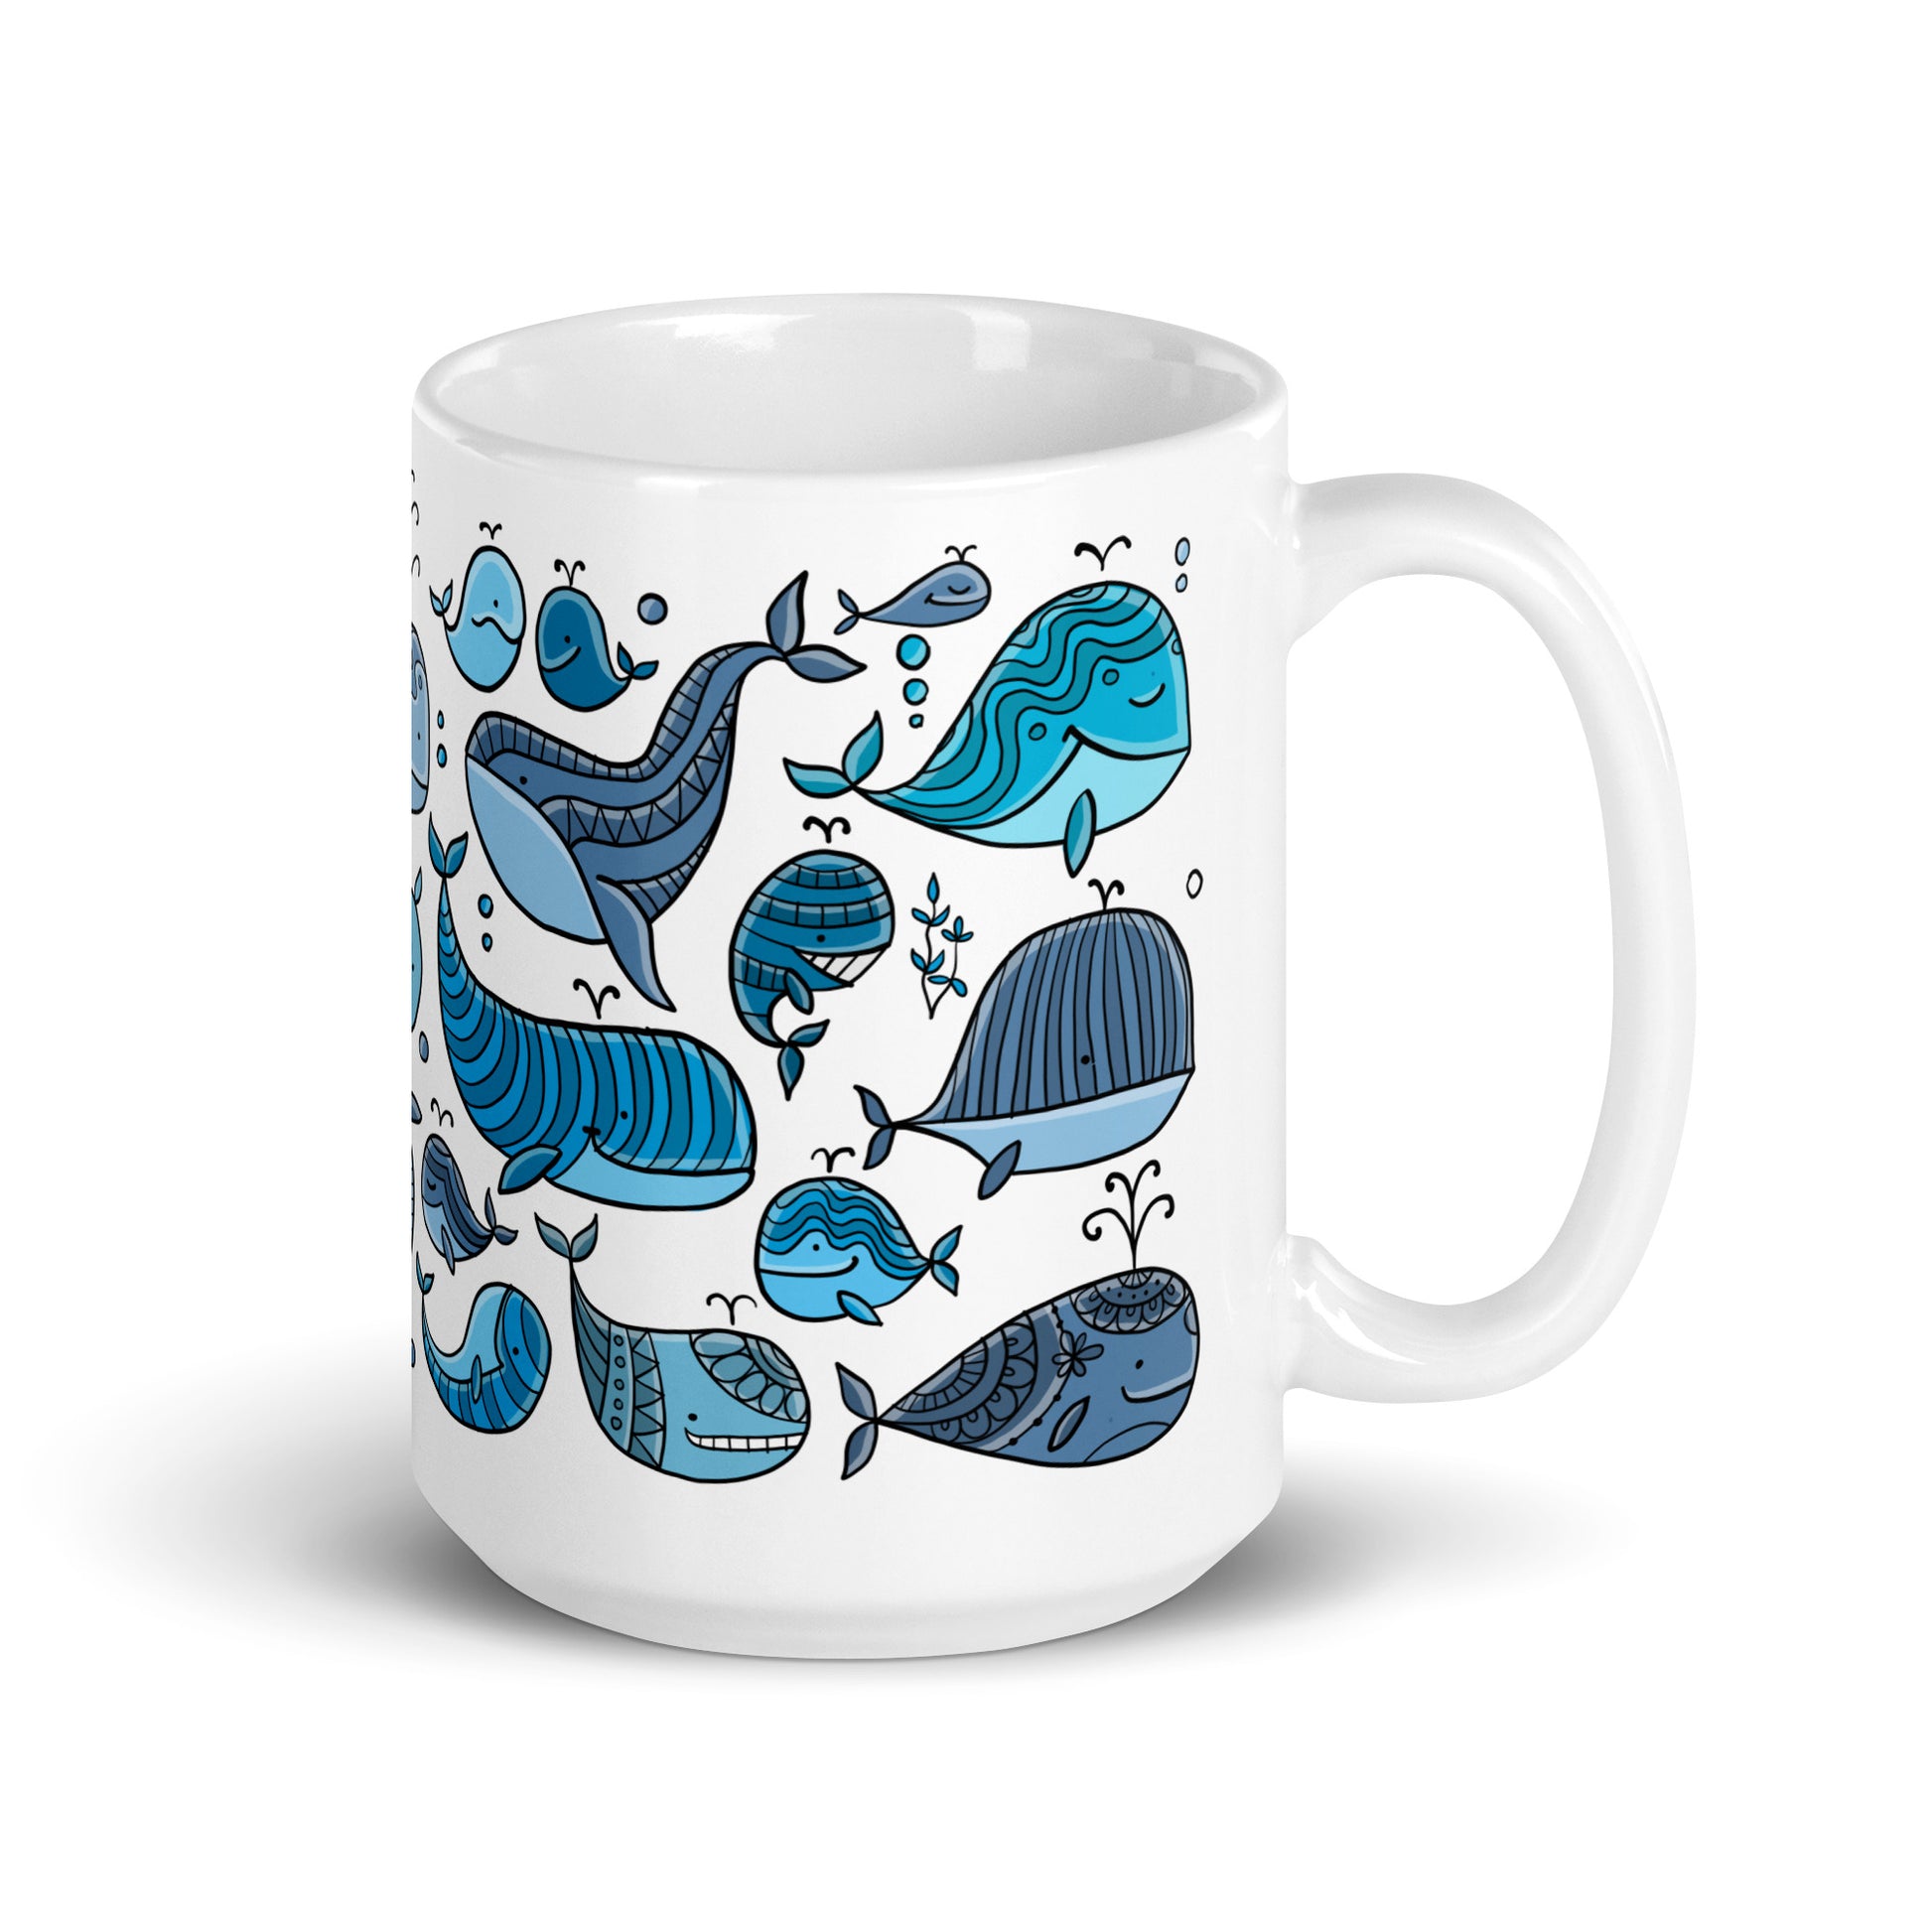 A charming ceramic gift mug 15 oz celebrating Whales Day. Funny whales families. Perfect for whale enthusiasts and marine life lovers.